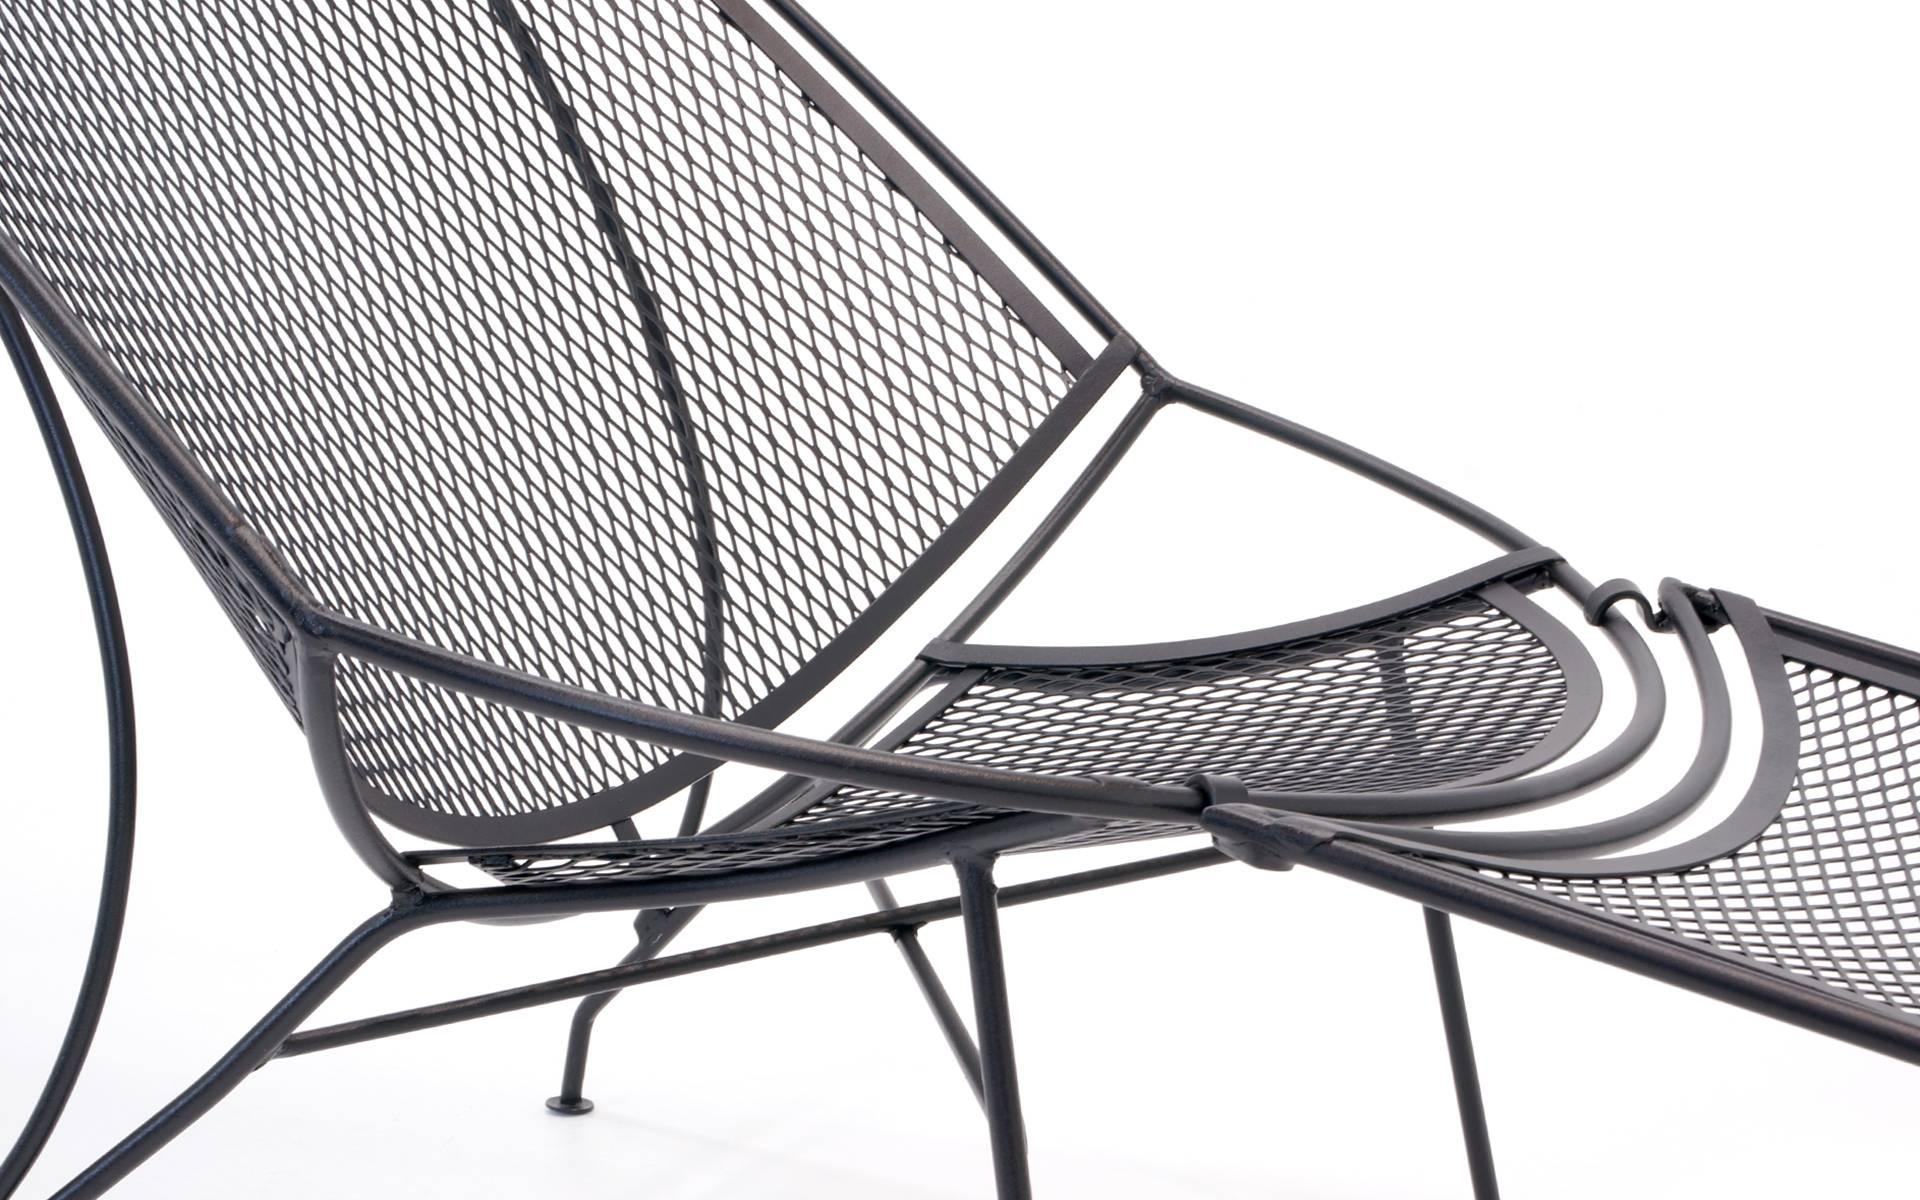 Mid-20th Century LAST PAIR John Salterini Patio Chaise Lounge Chairs, Removable Footrest. Black.